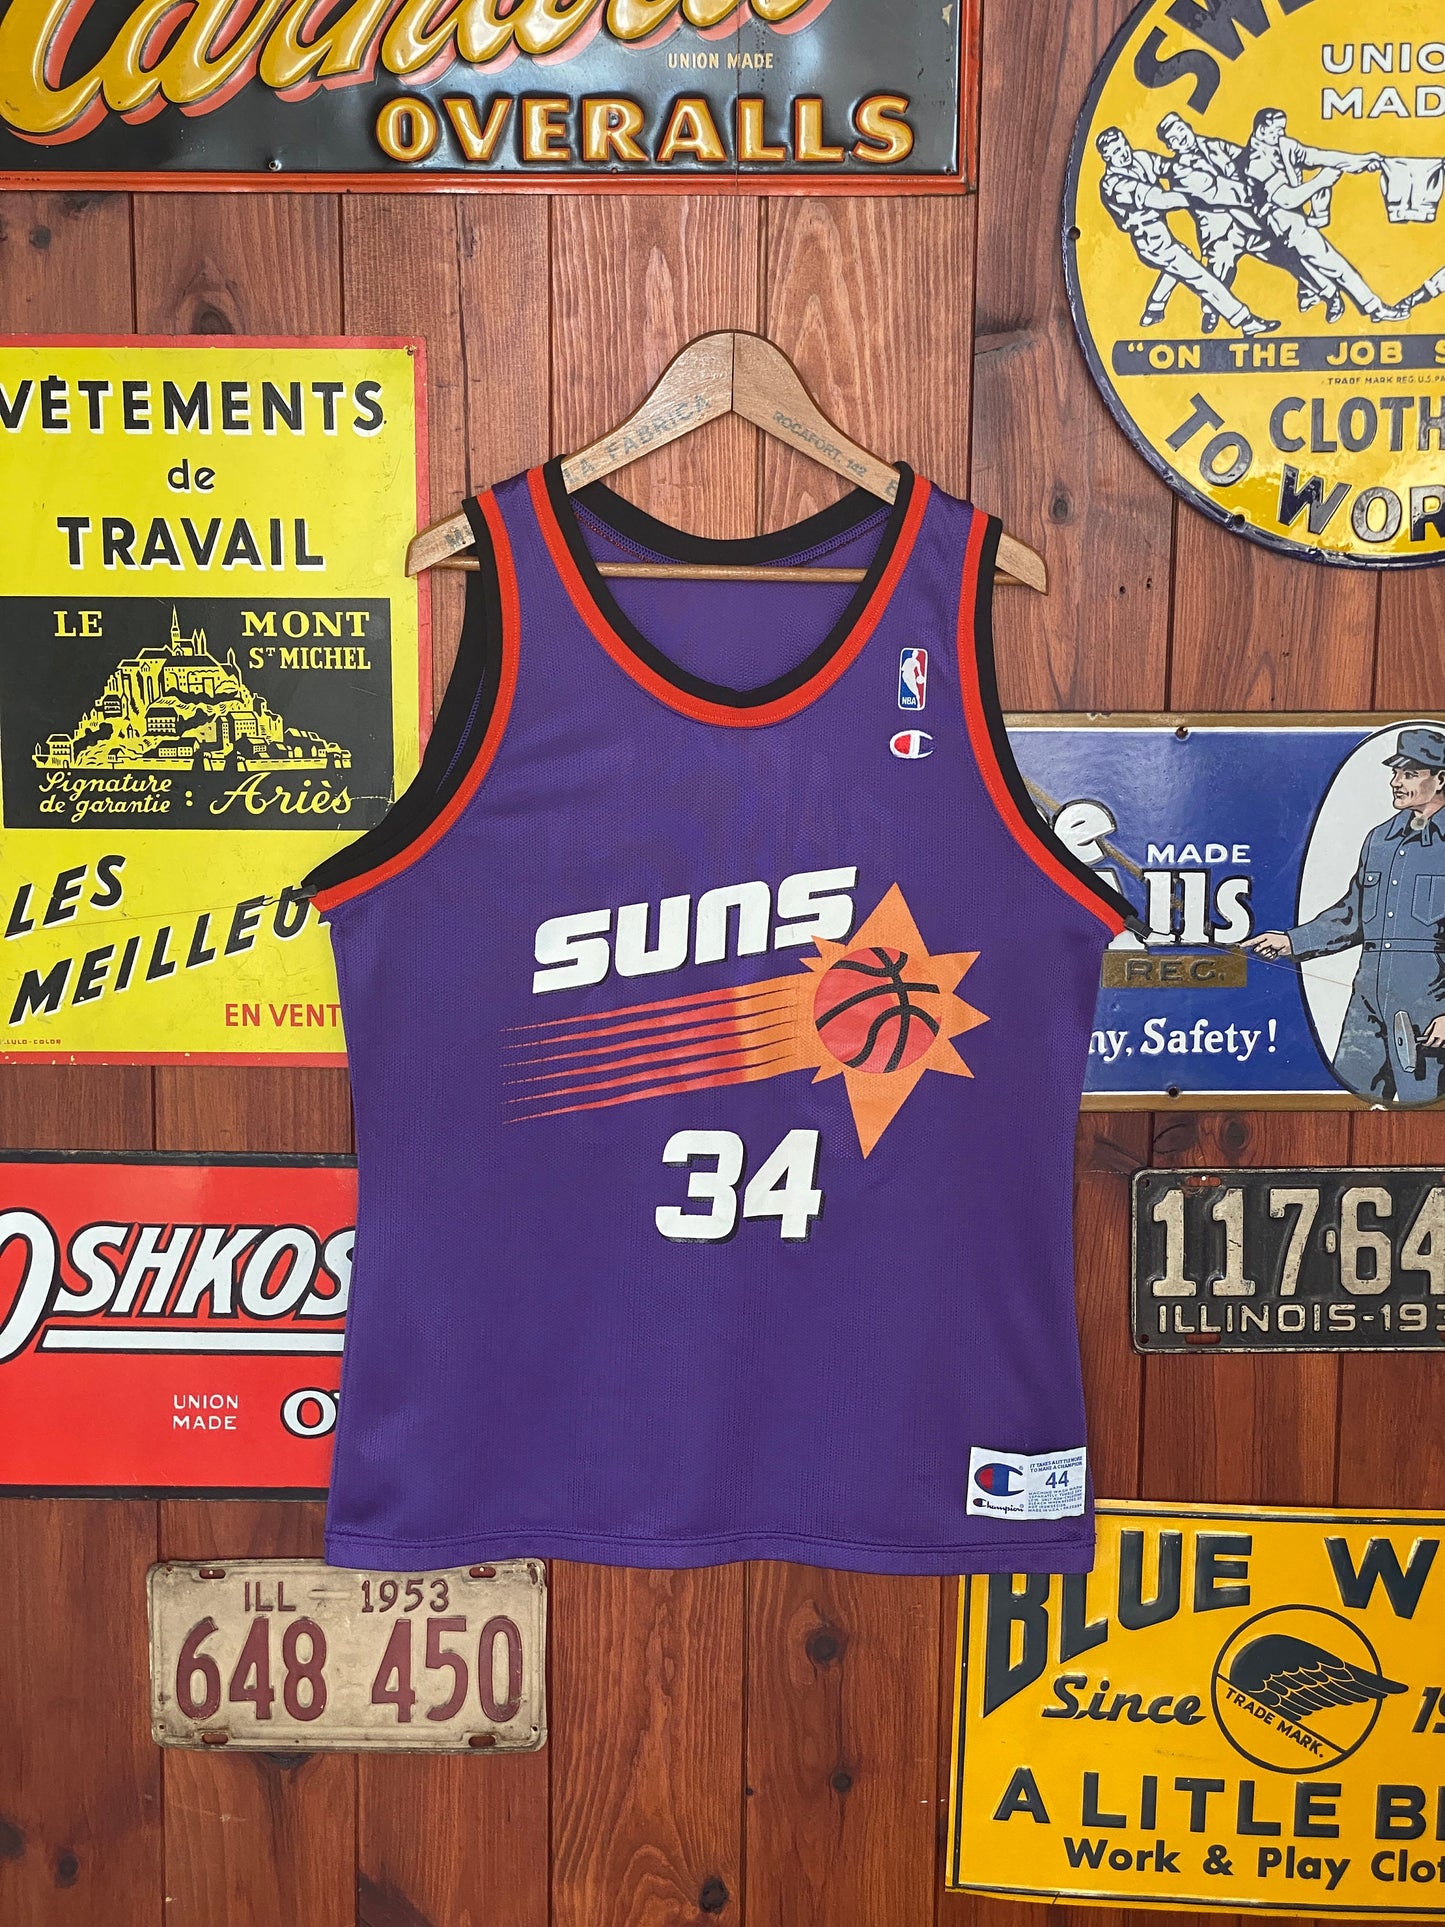 Vintage Suns NBA Jersey #34 Barkley - Size 44 | Made in USA by Champion